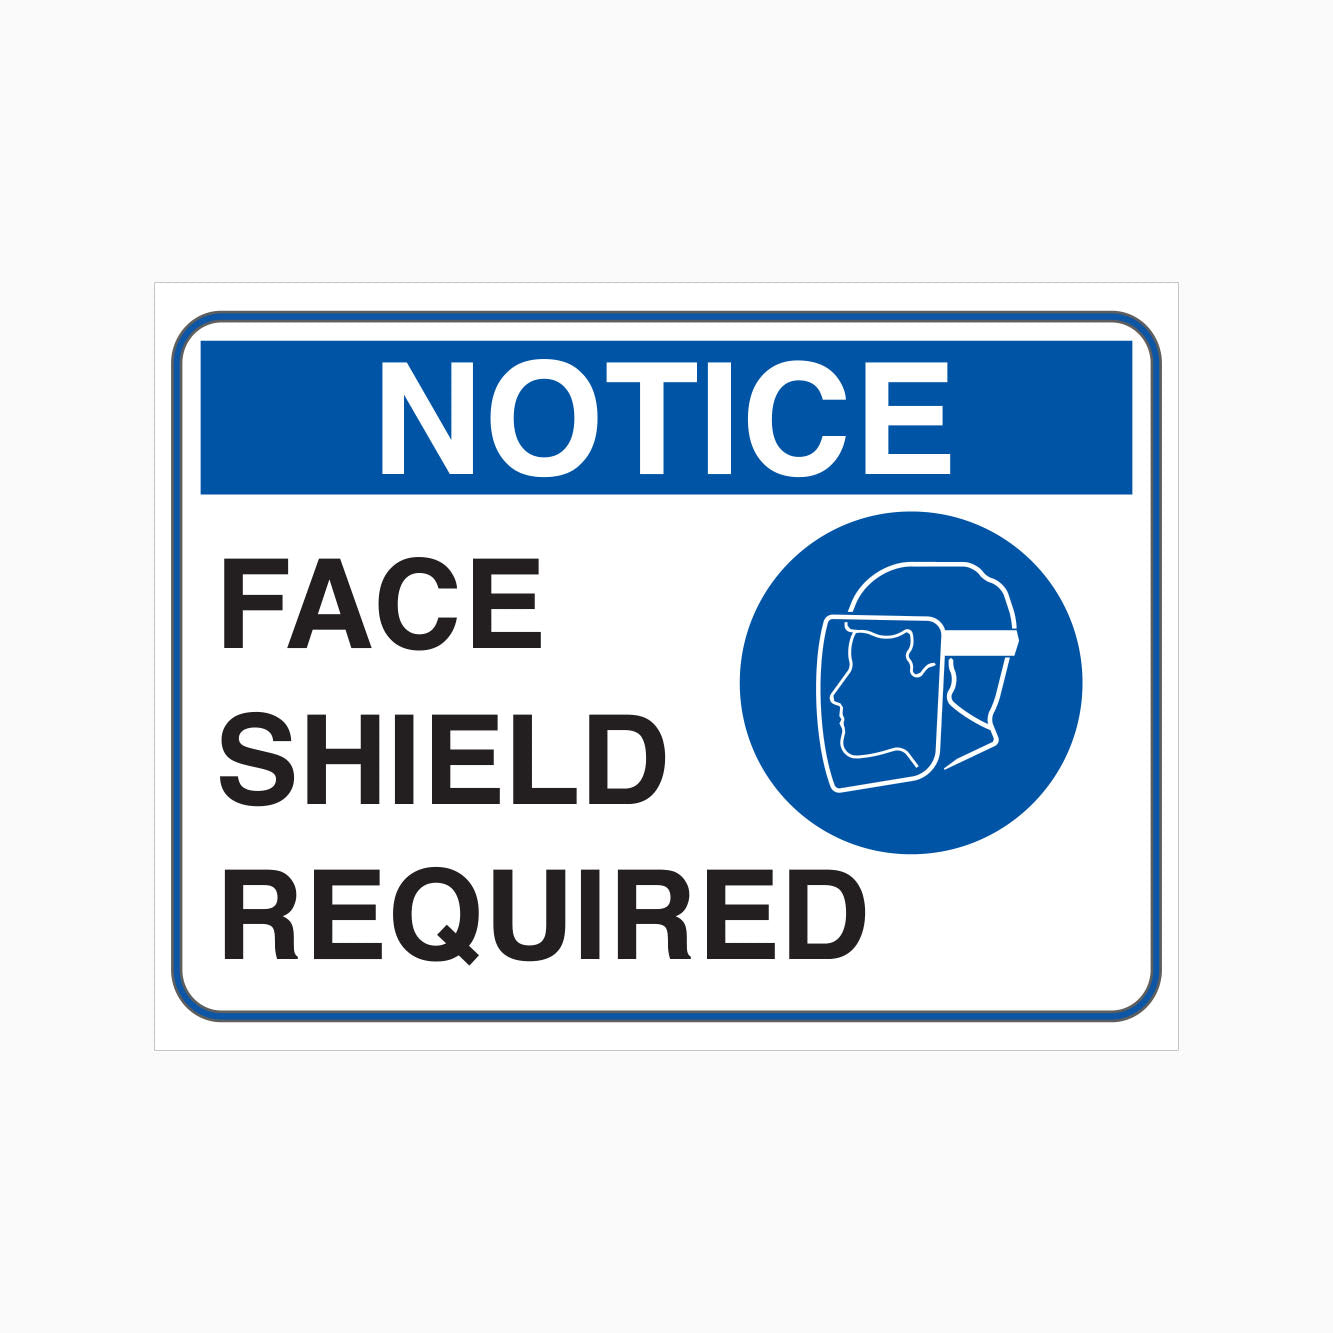 NOTICE FACE SHIELD REQUIRED SIGN